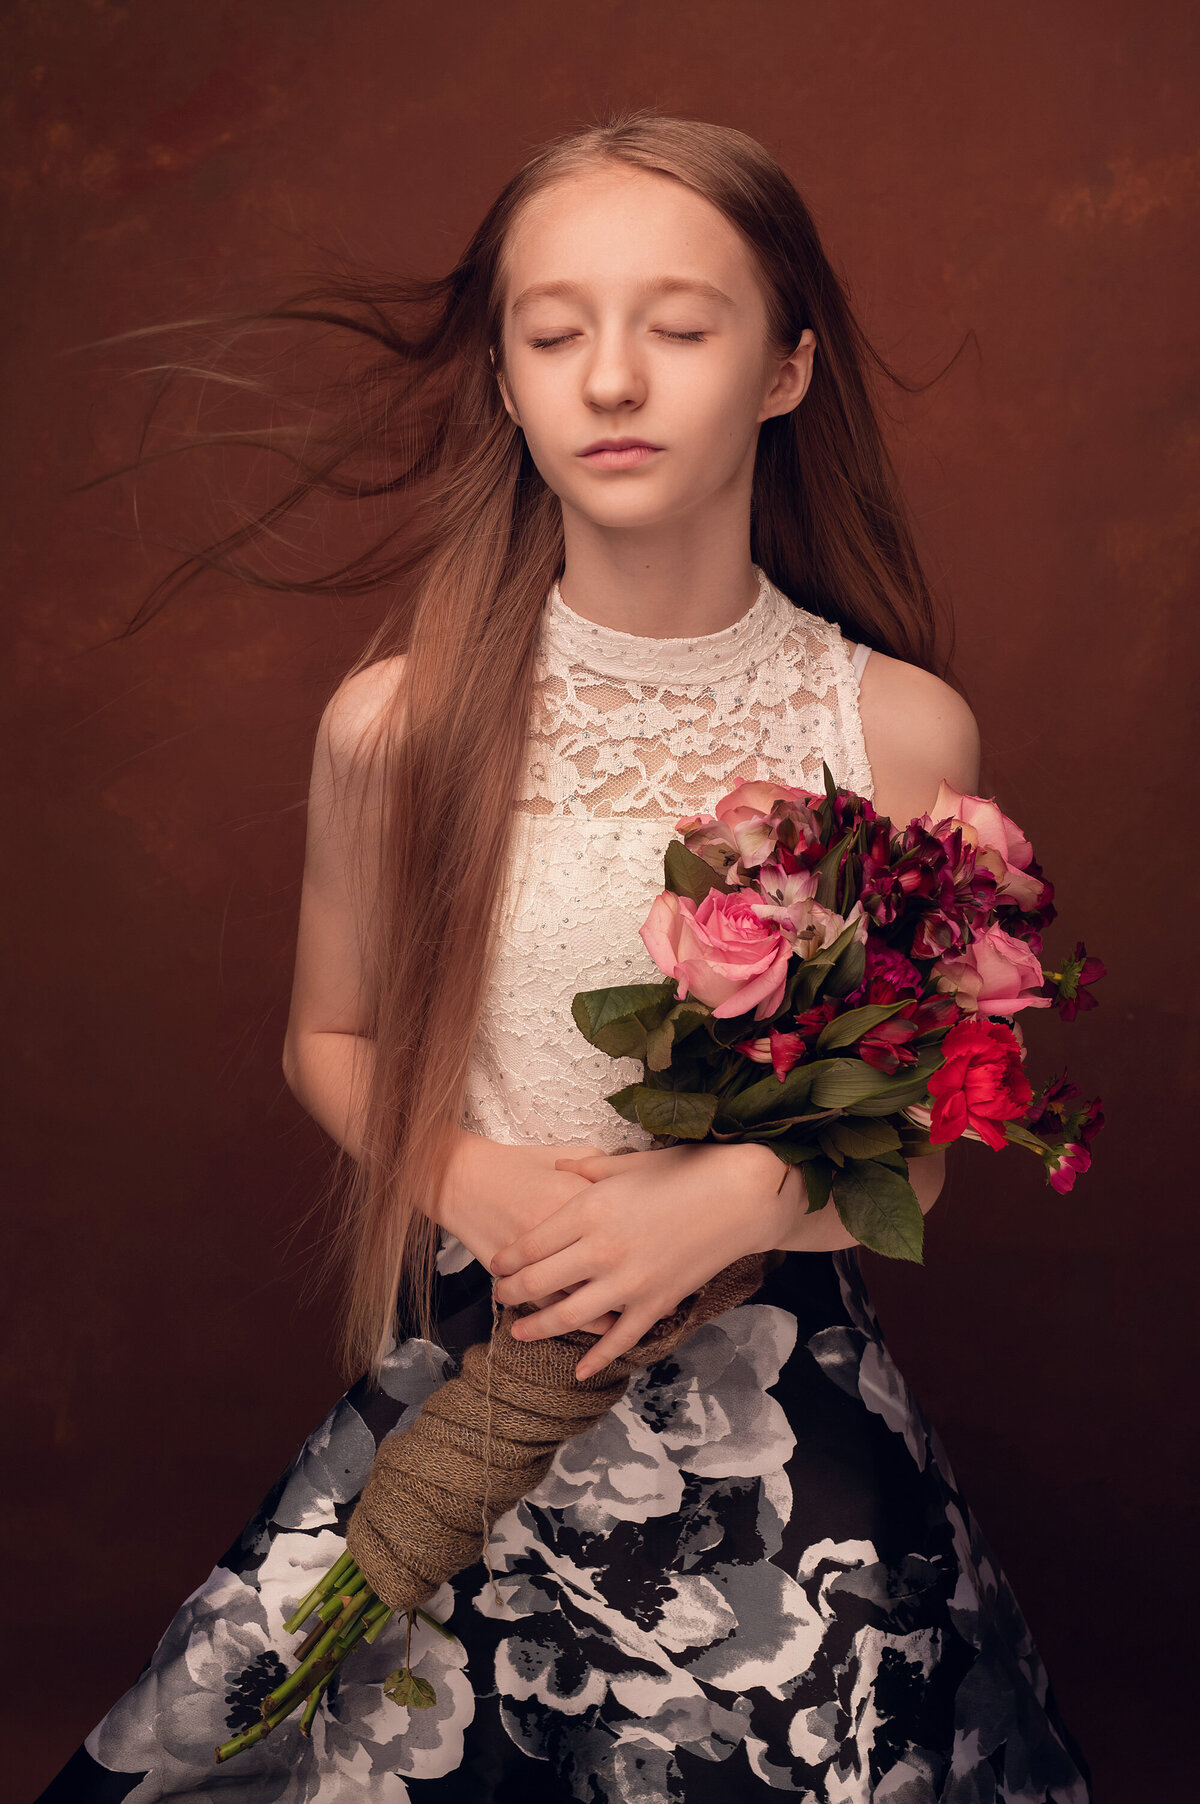 A young girl has her portrait taken in our Waukesha studio while holding a bouquet of roses with her eyes closed and her hair blowing.